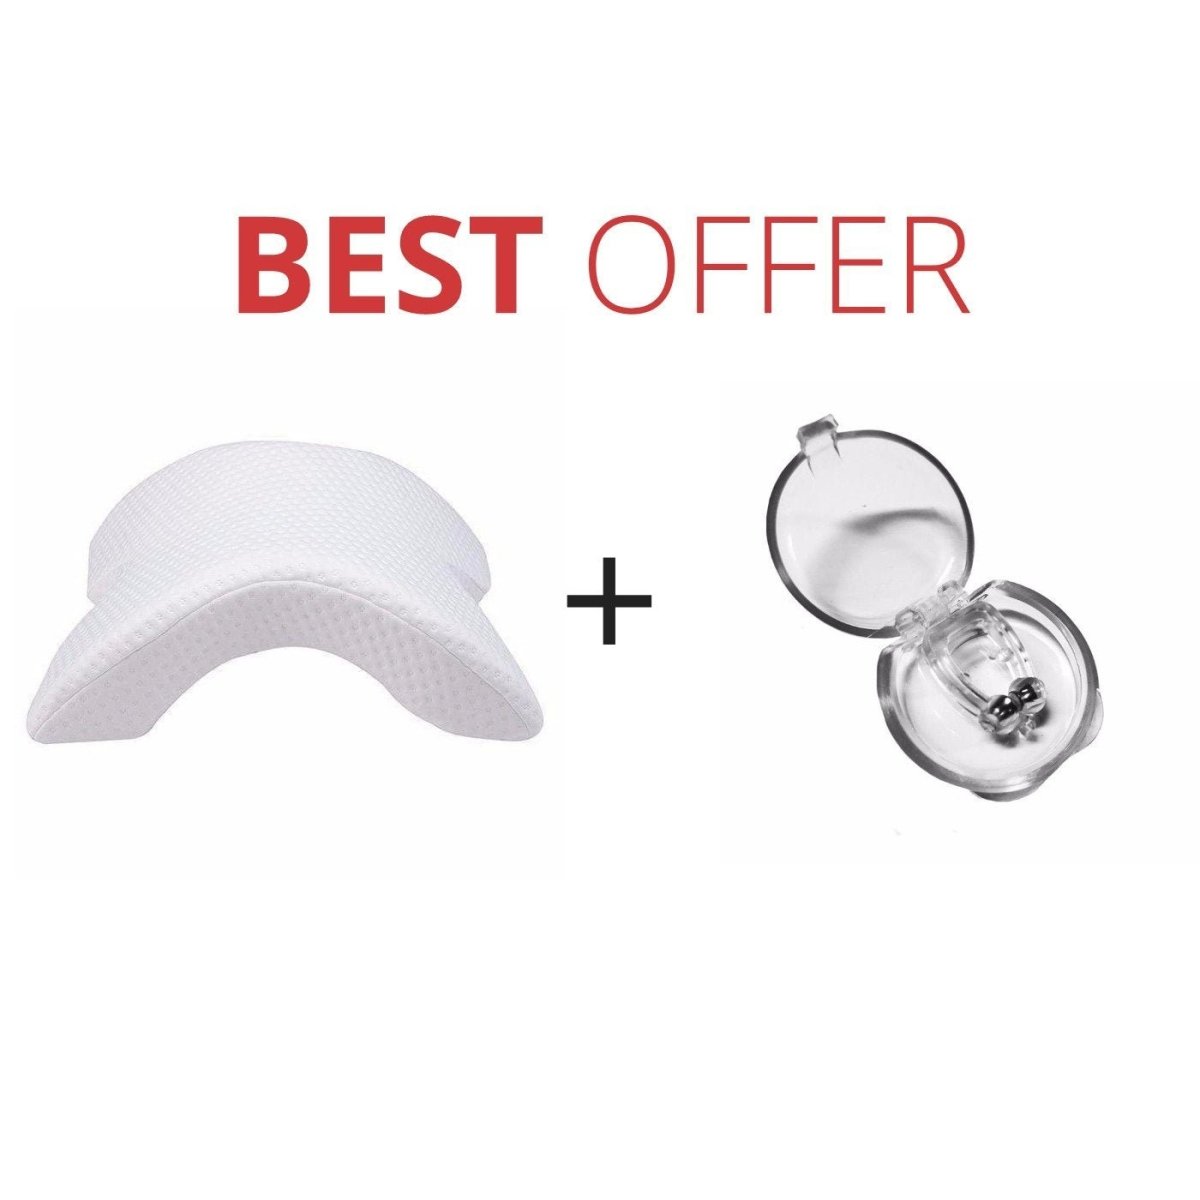 Silicone Anti-Snore Nose Clip | Sleep Aid for Quiet Nights | TrendyAffordables - TrendyAffordables - 0